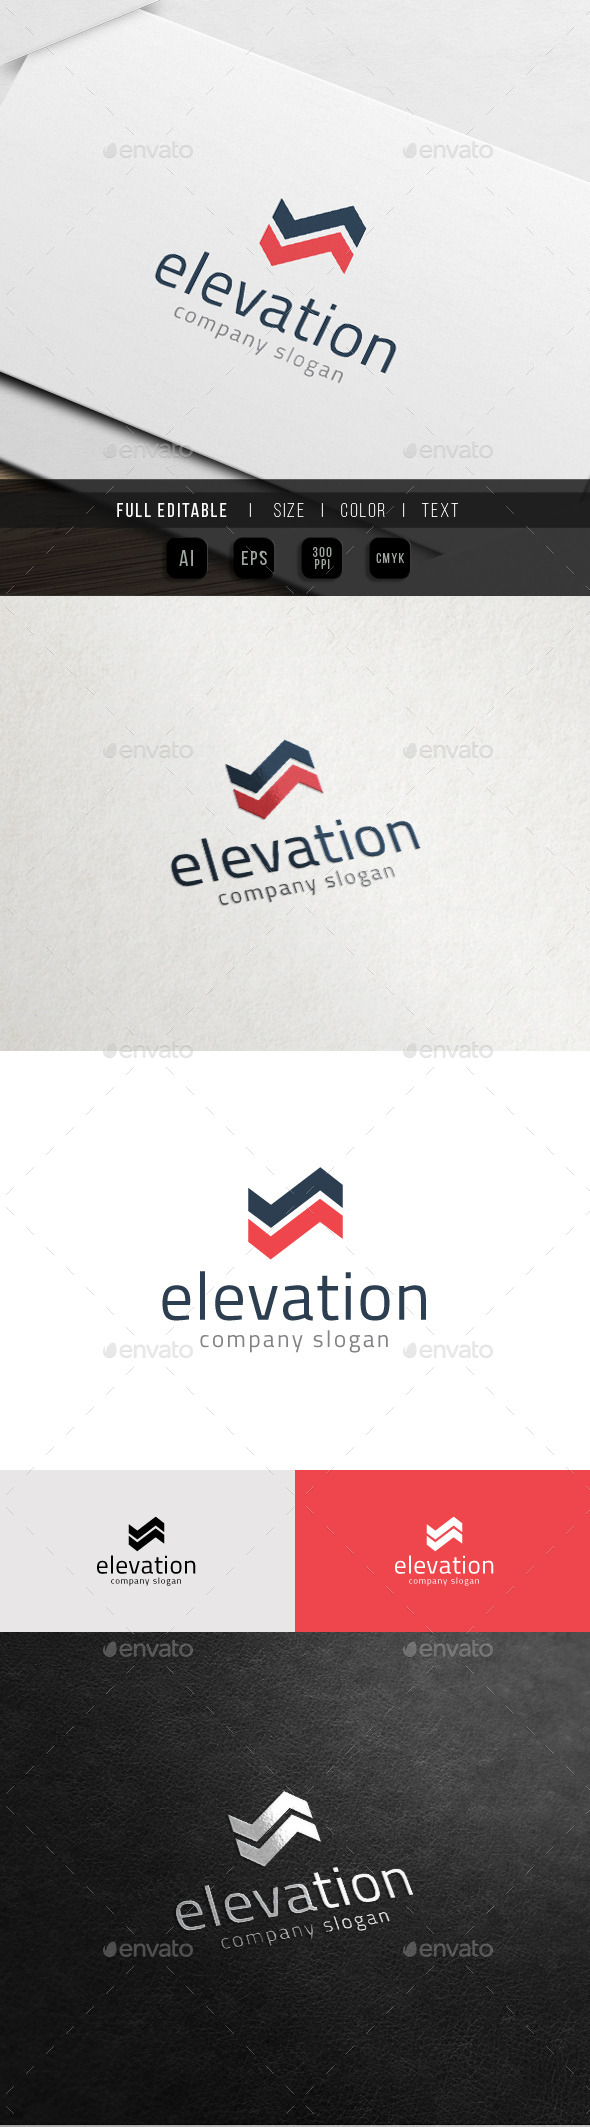 Up Growth - Business Elevation Logo